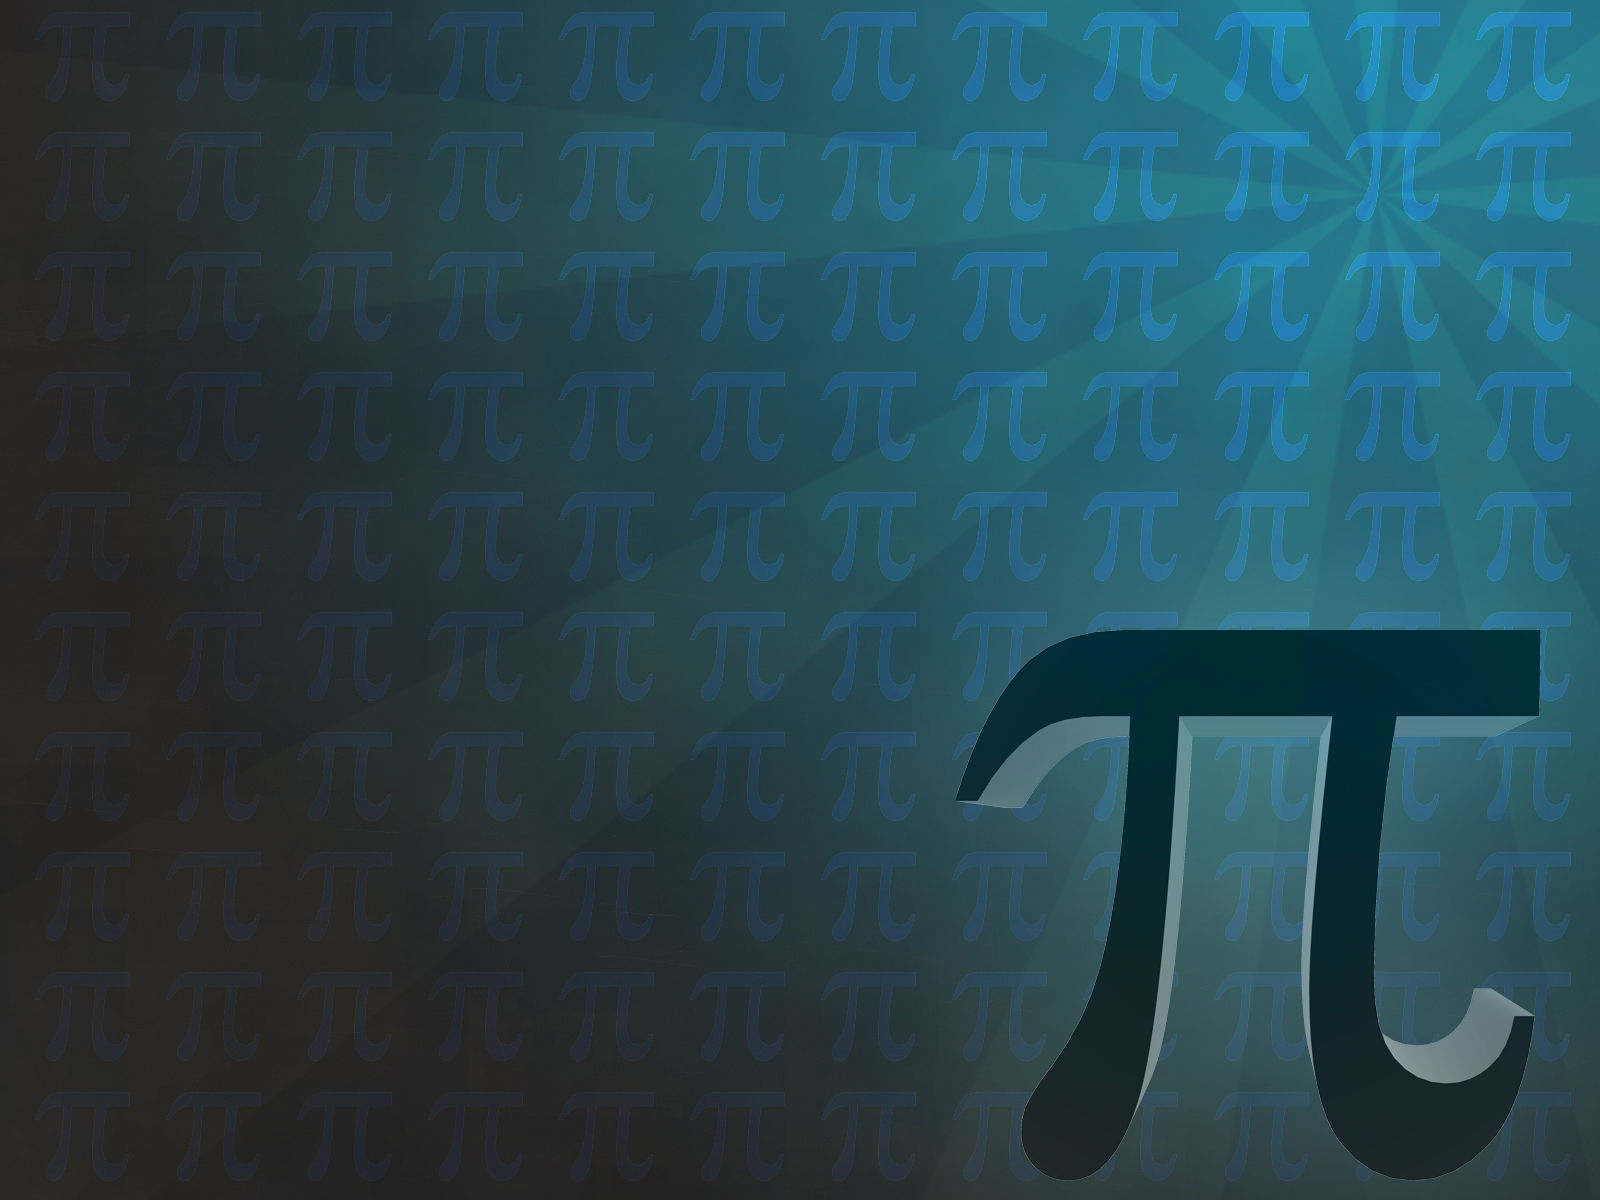 Pi Mathematical Powerpoint Templates - Aqua / Cyan, Black, Blue, Education  - Free PPT Backgrounds and Templates